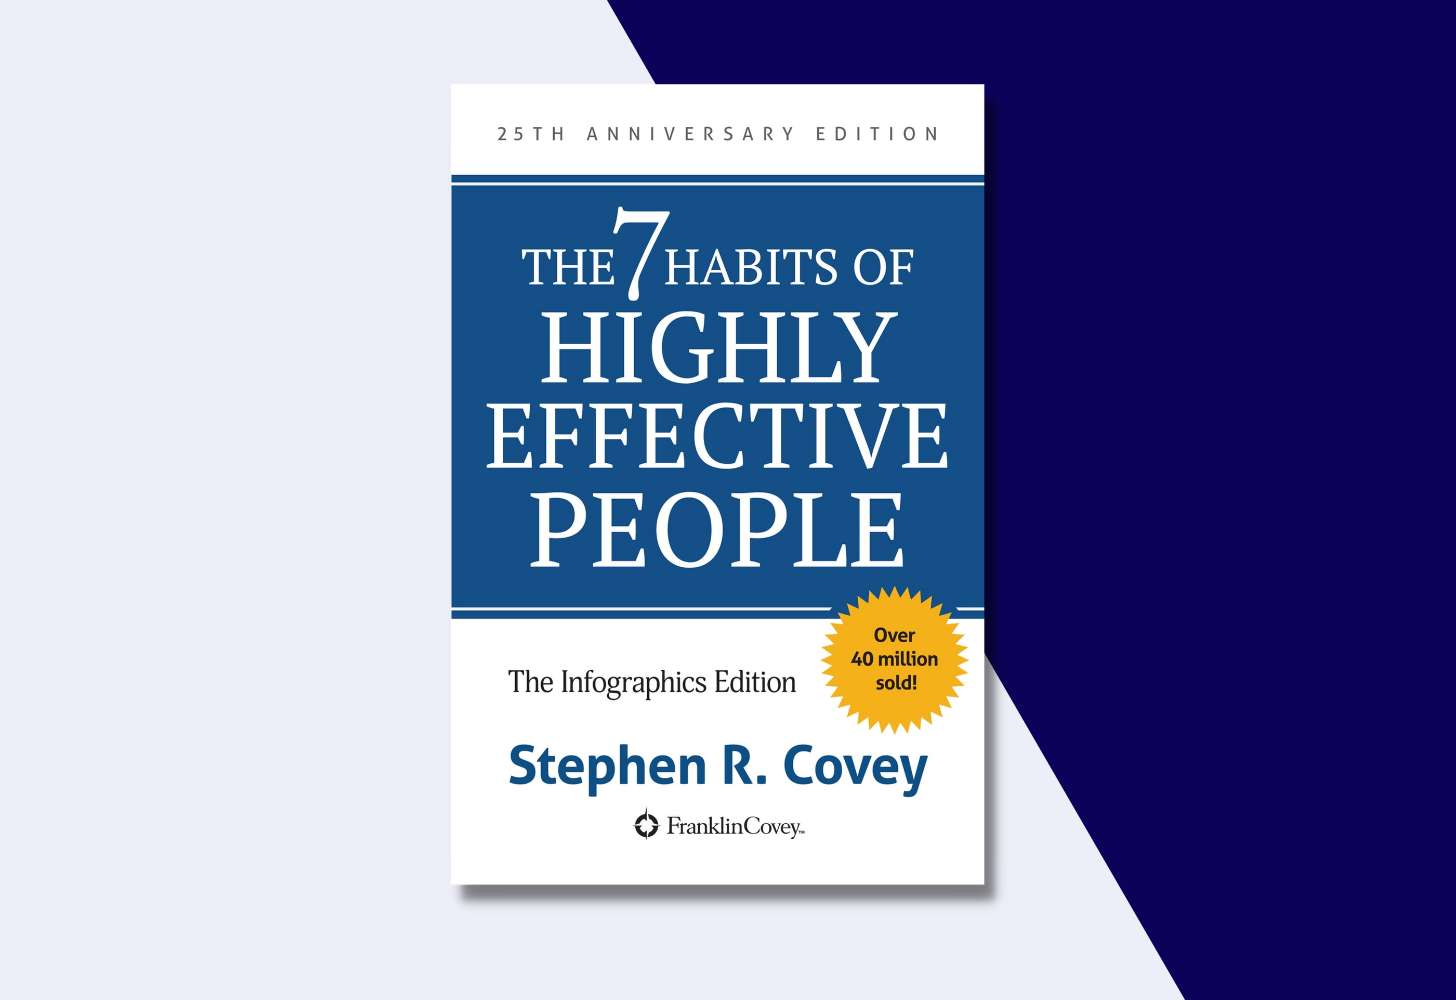 Book cover of The 7 Habits of Highly Effective People by Stephen R. Covey